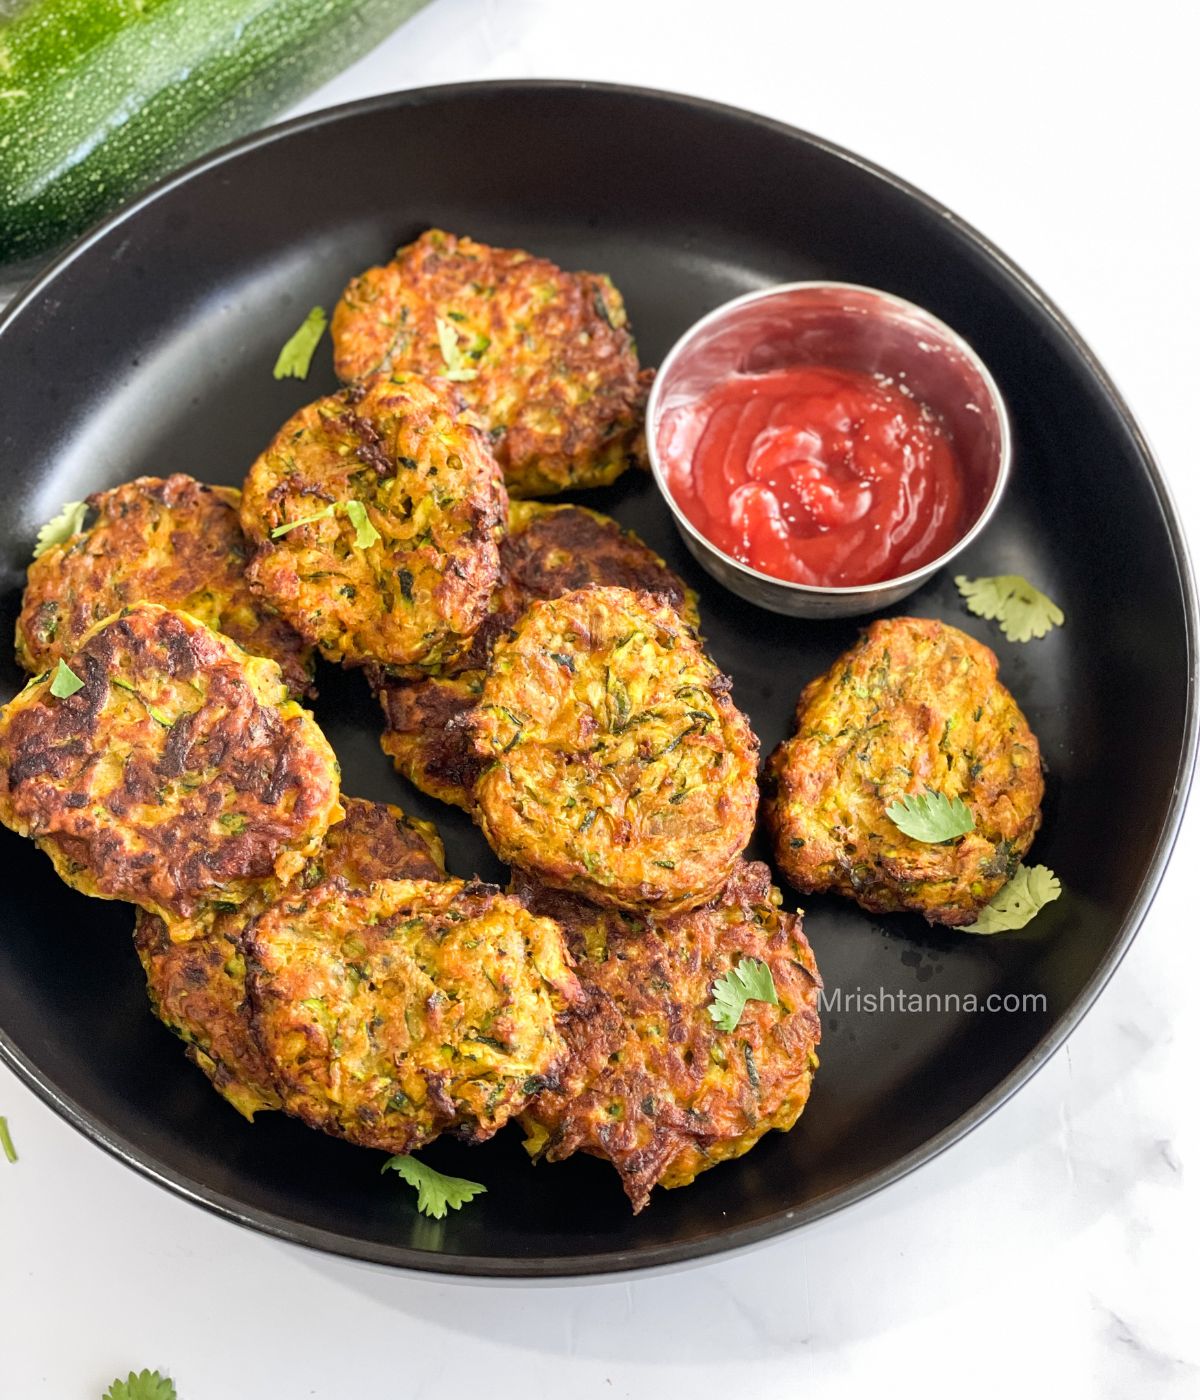 A plate of zucchini fritters is on the table.